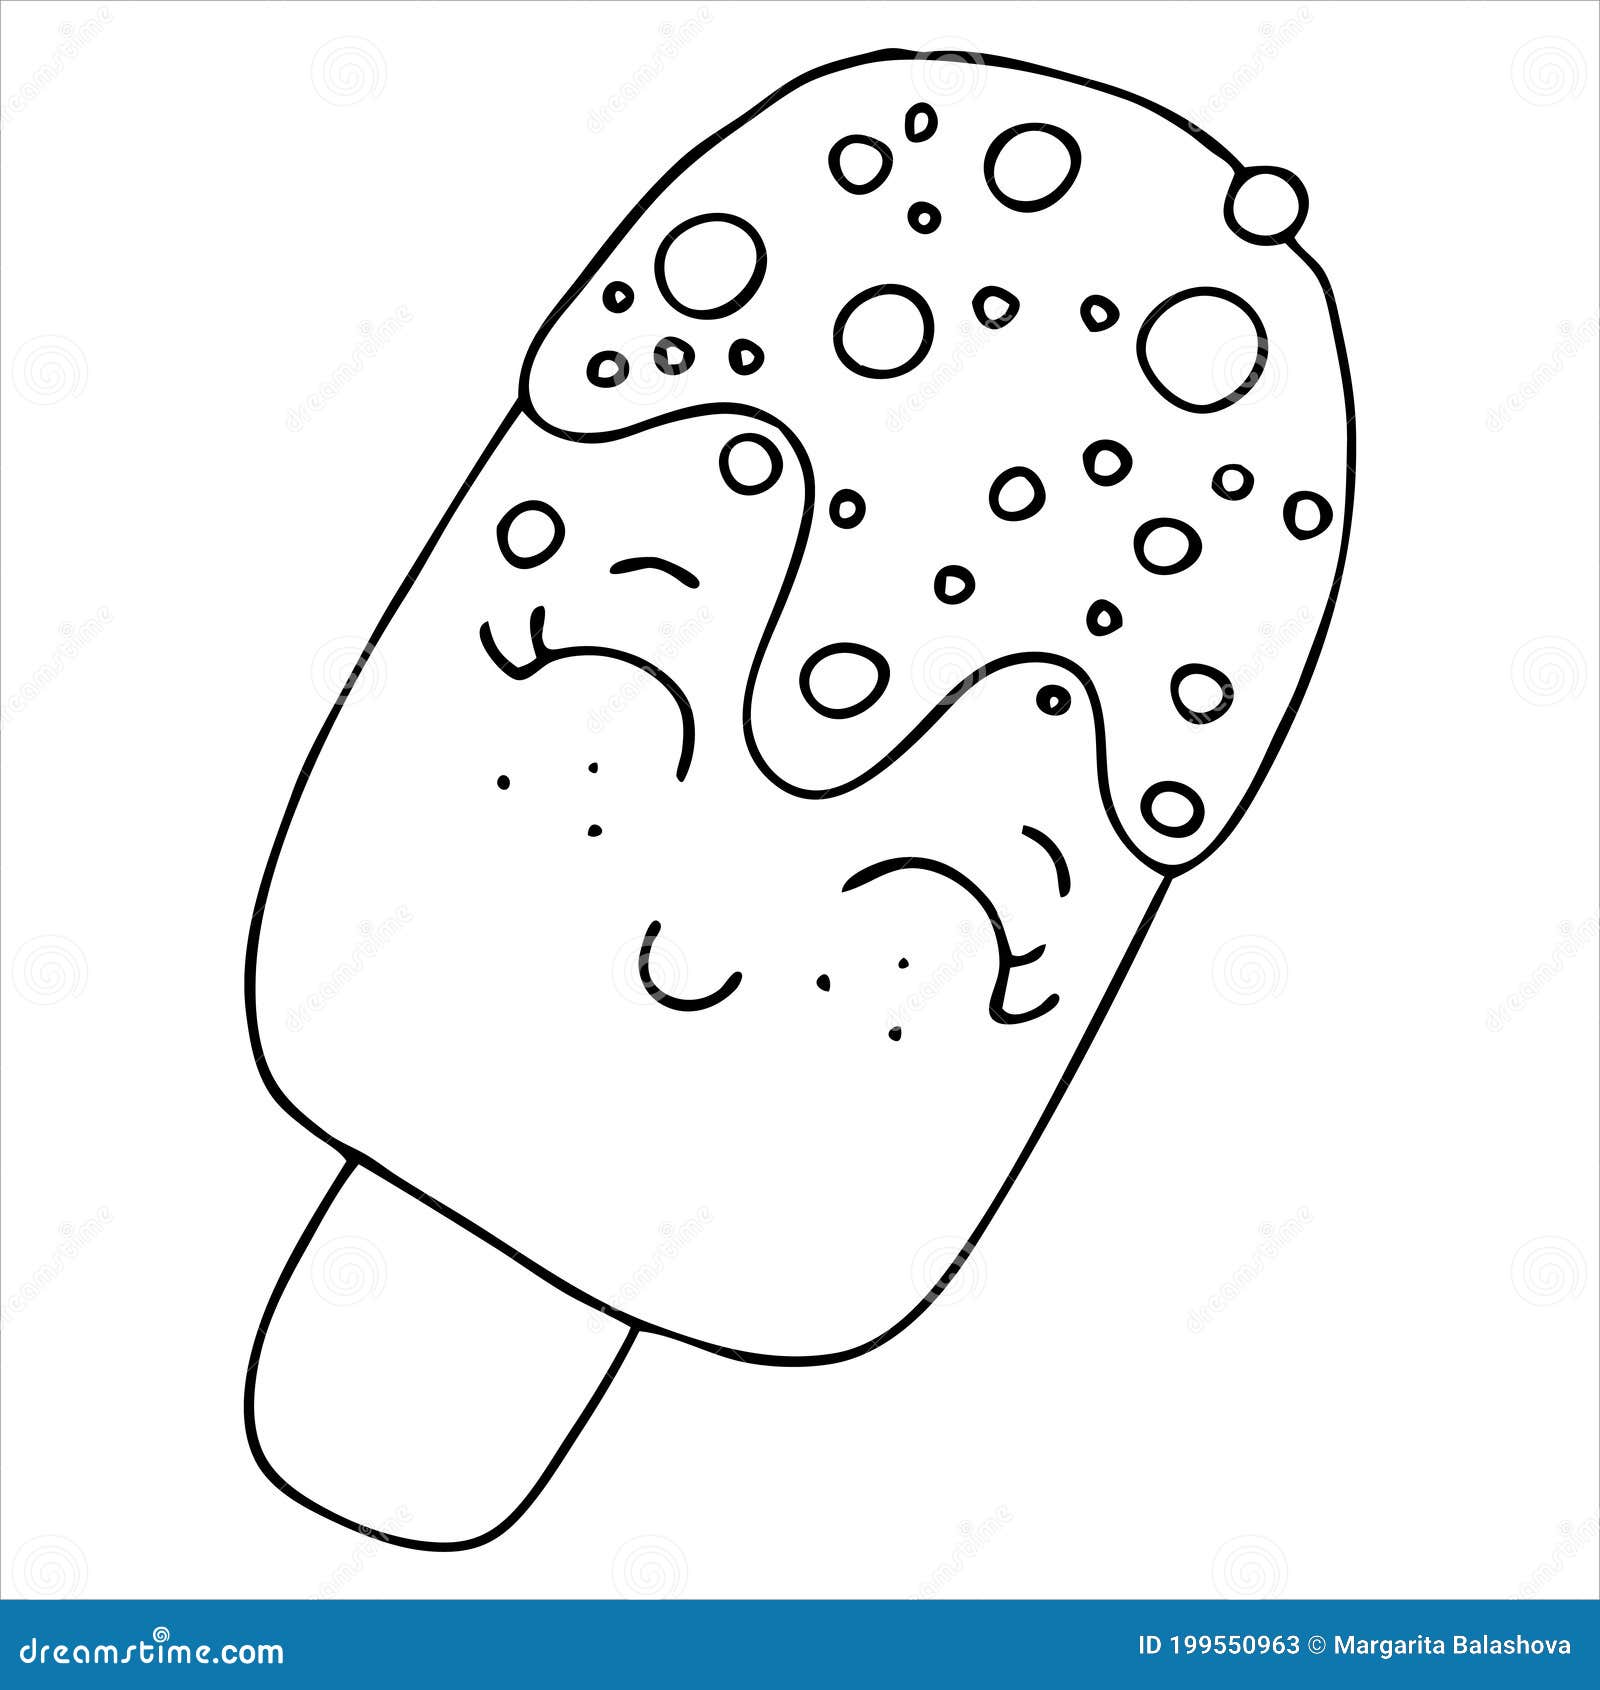 Cute popsicle ice cream on a stick with eyes cute drawing for kids coloring book vector element stock vector